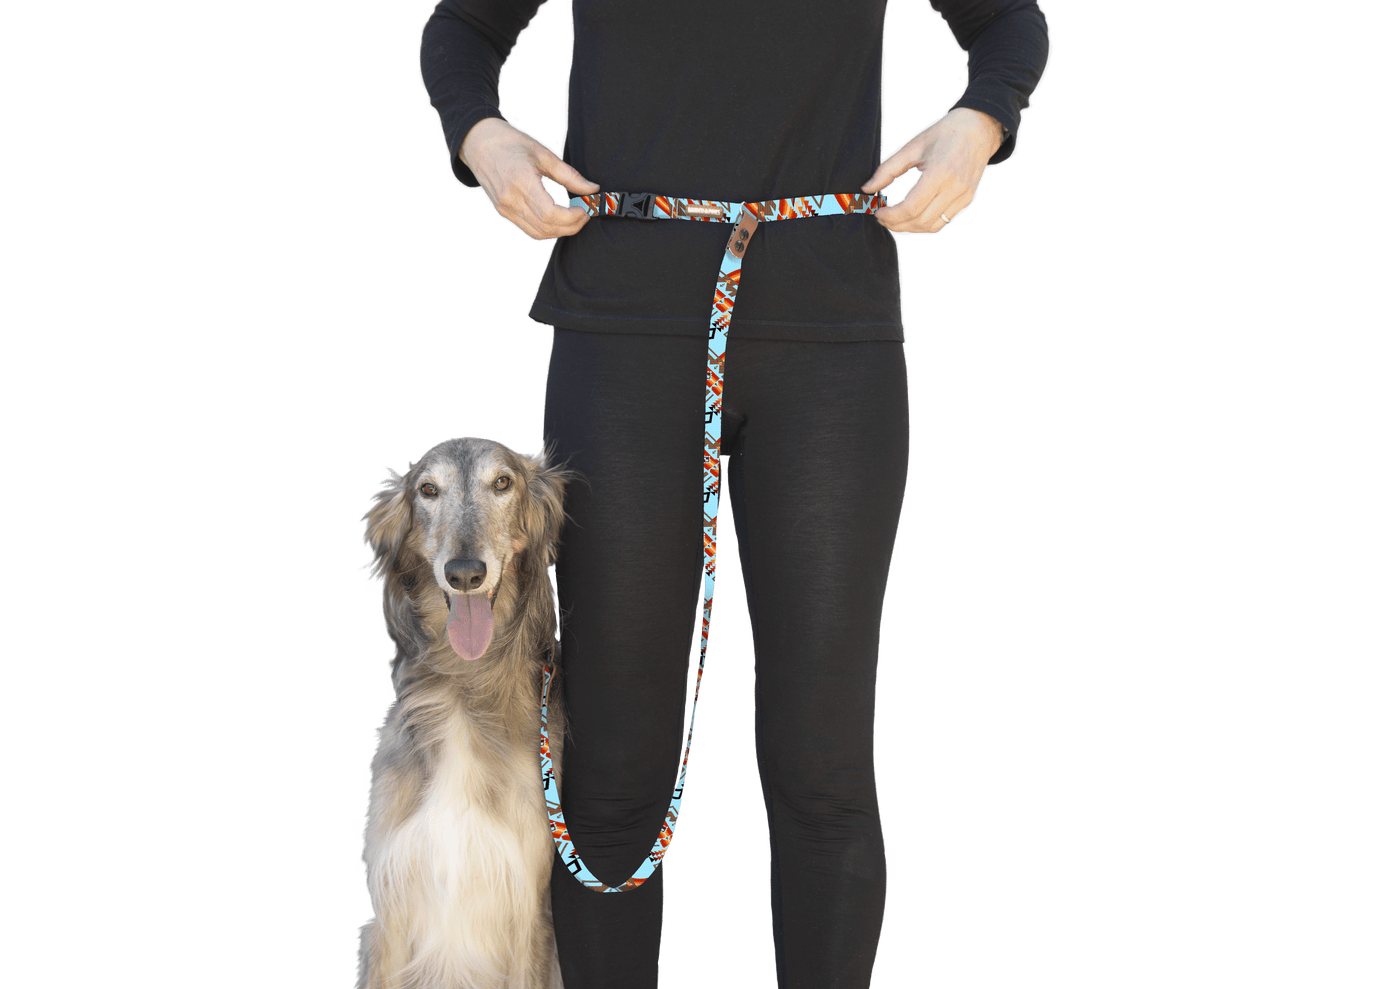 Frosted Sky Slip-Lead Dog Leash